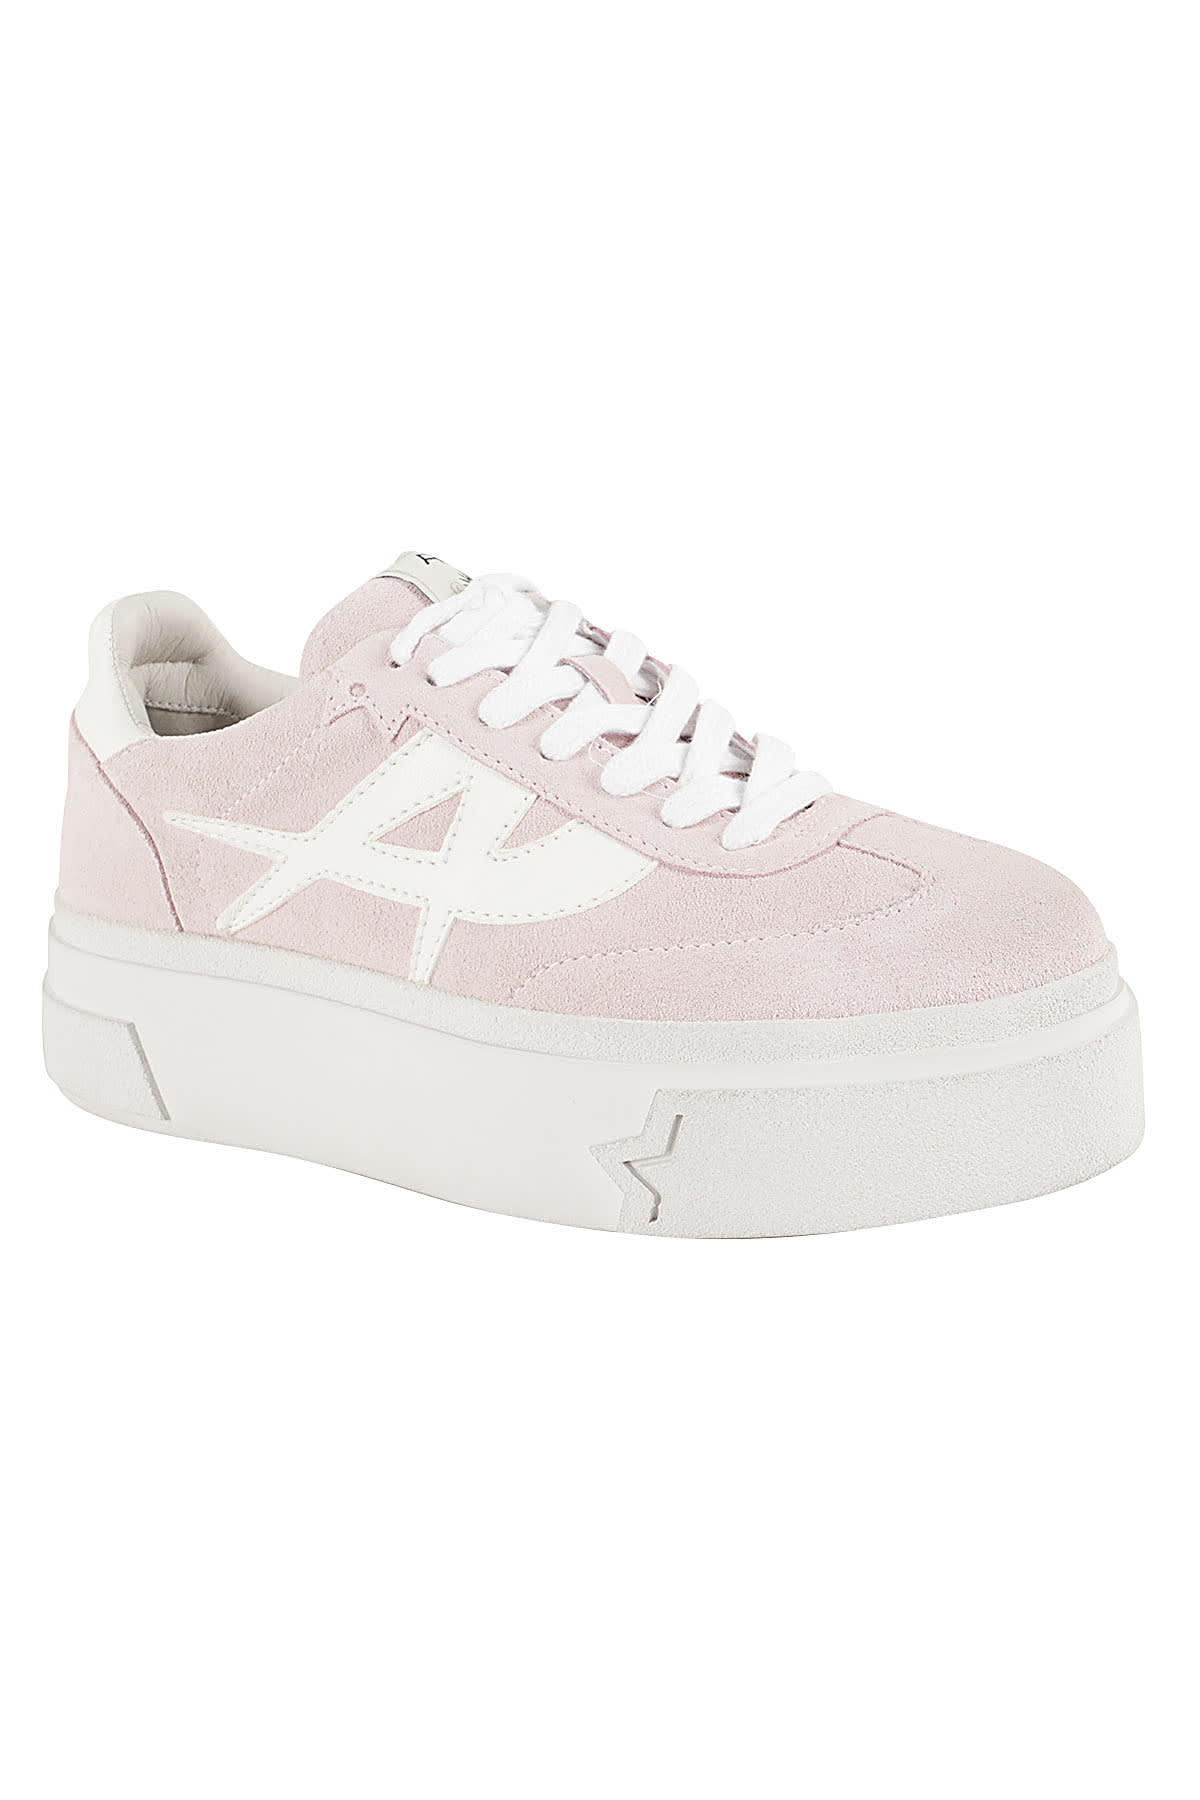 Shop Ash Calf Suede Crystal In Rose Wht